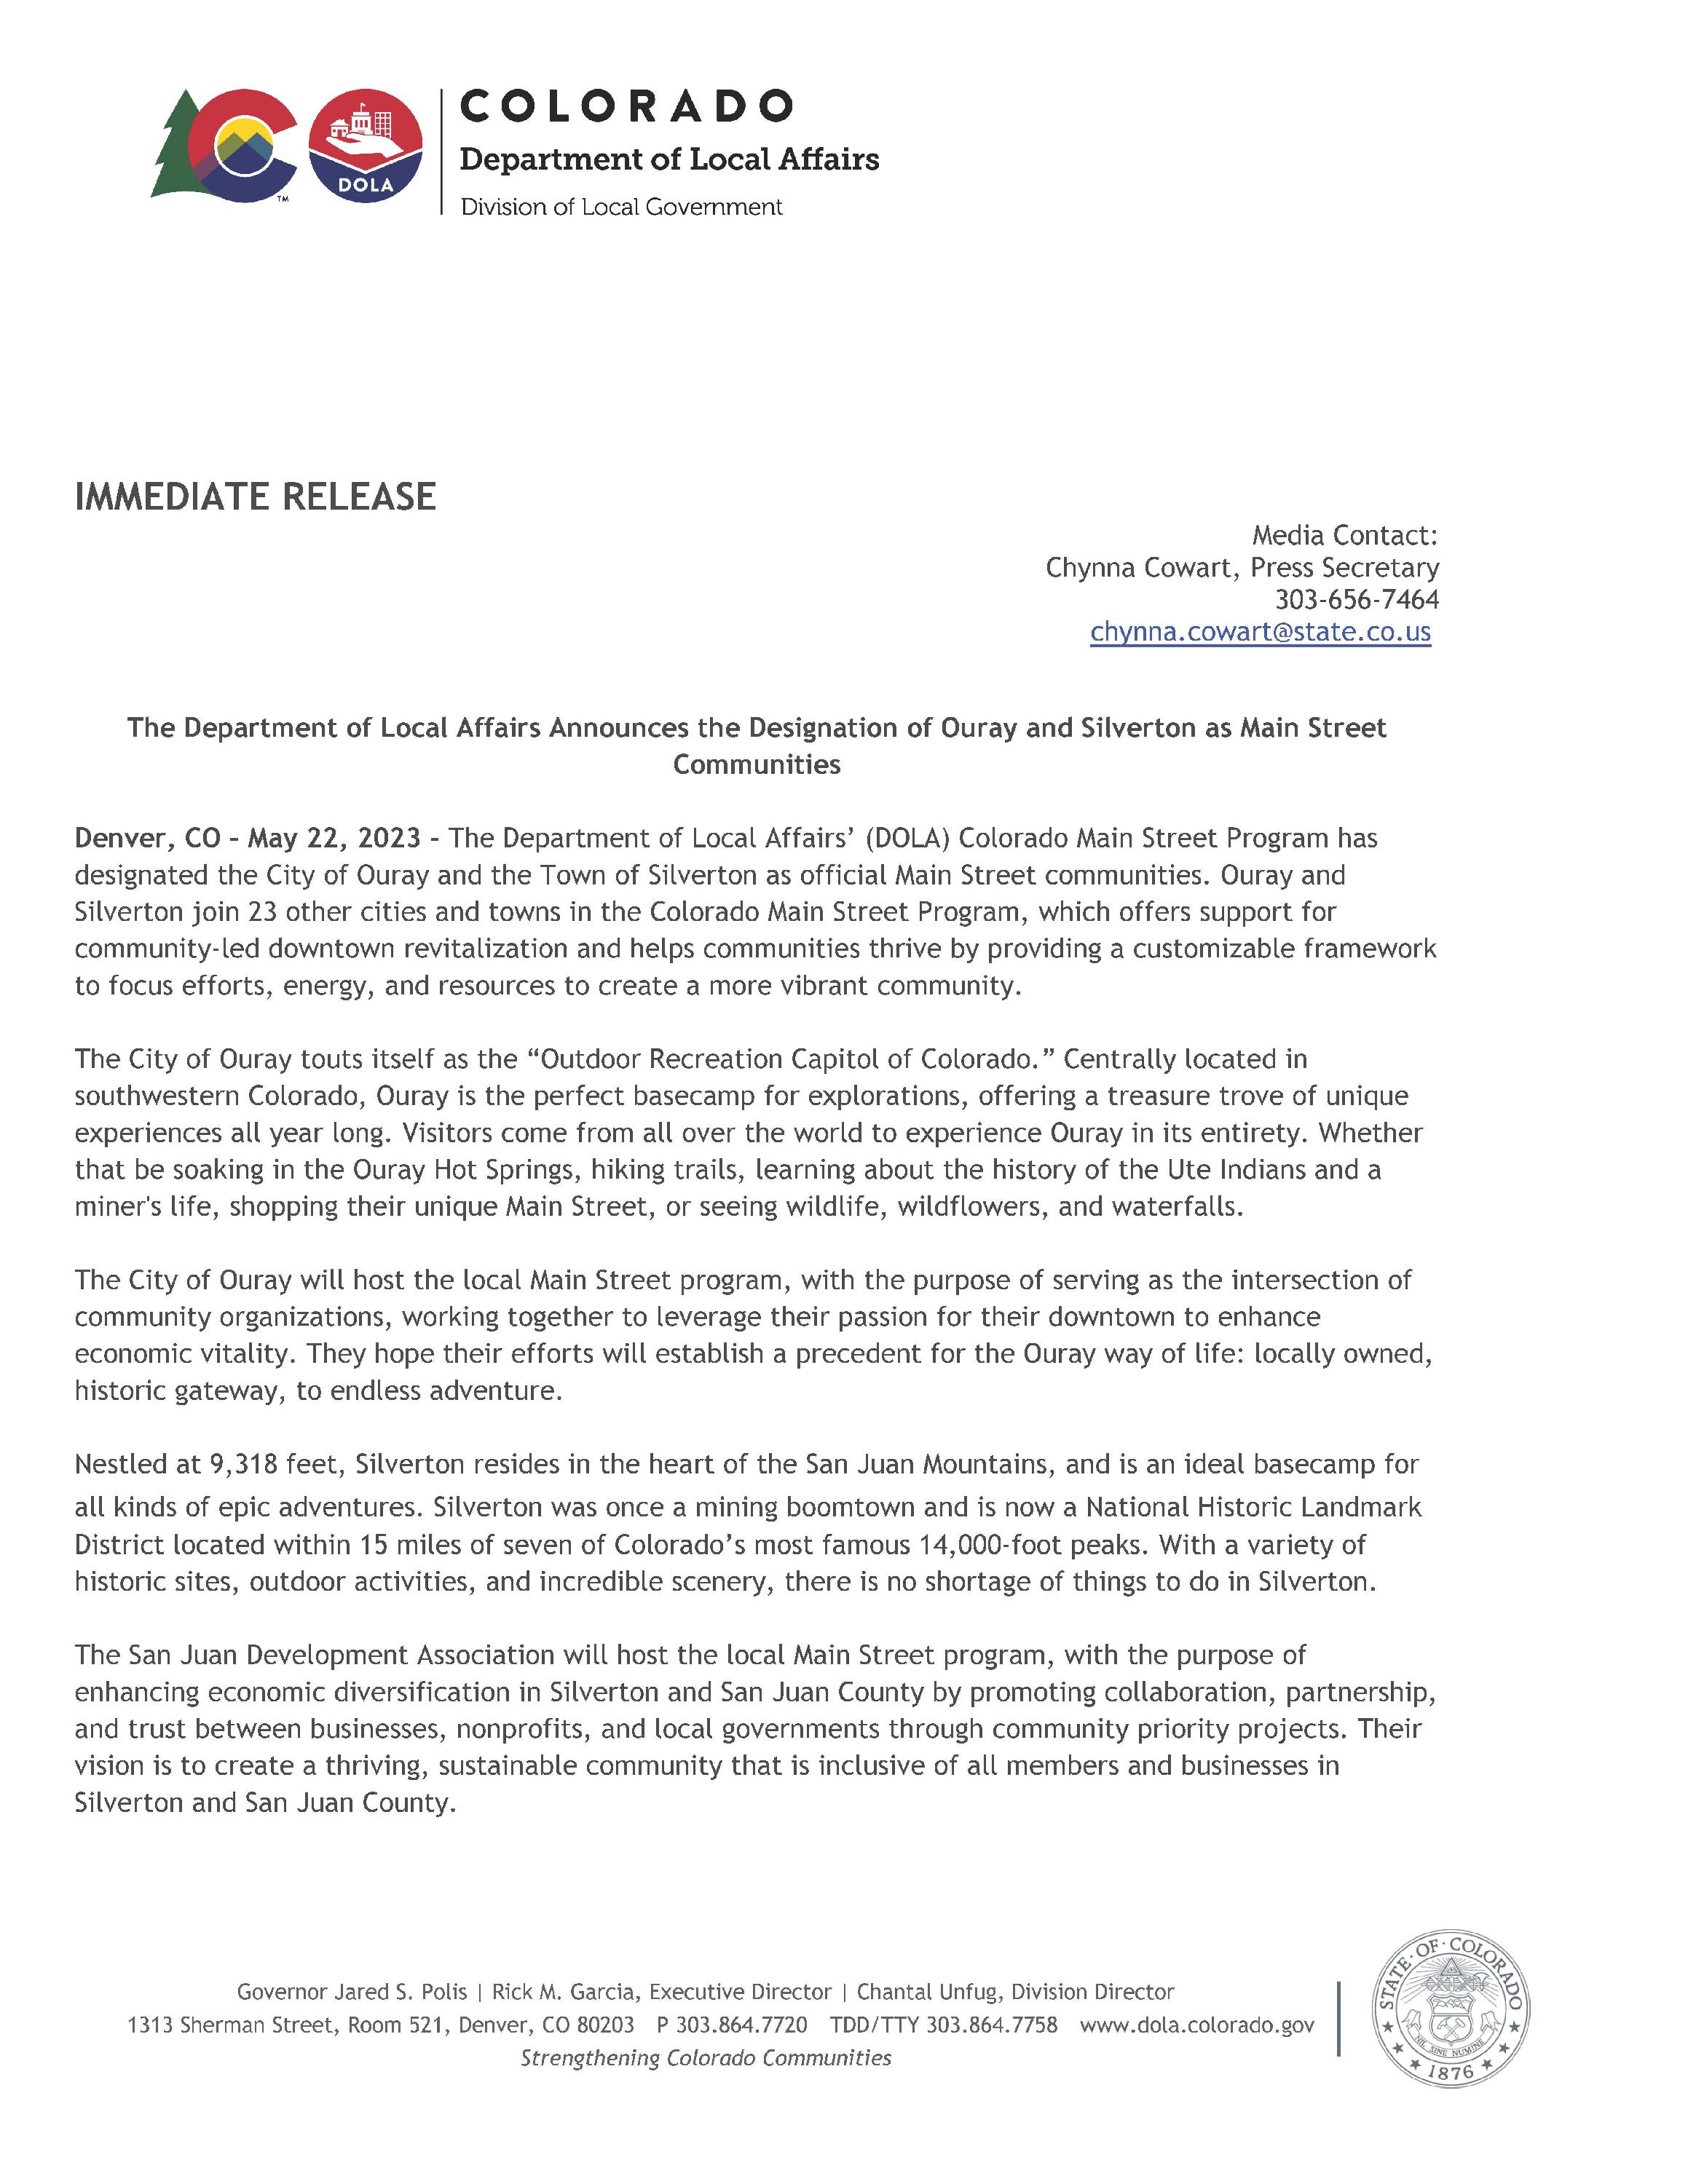 Press Release_05.22.2023_DOLA_Communities-Ouray and Silverton_Page_1